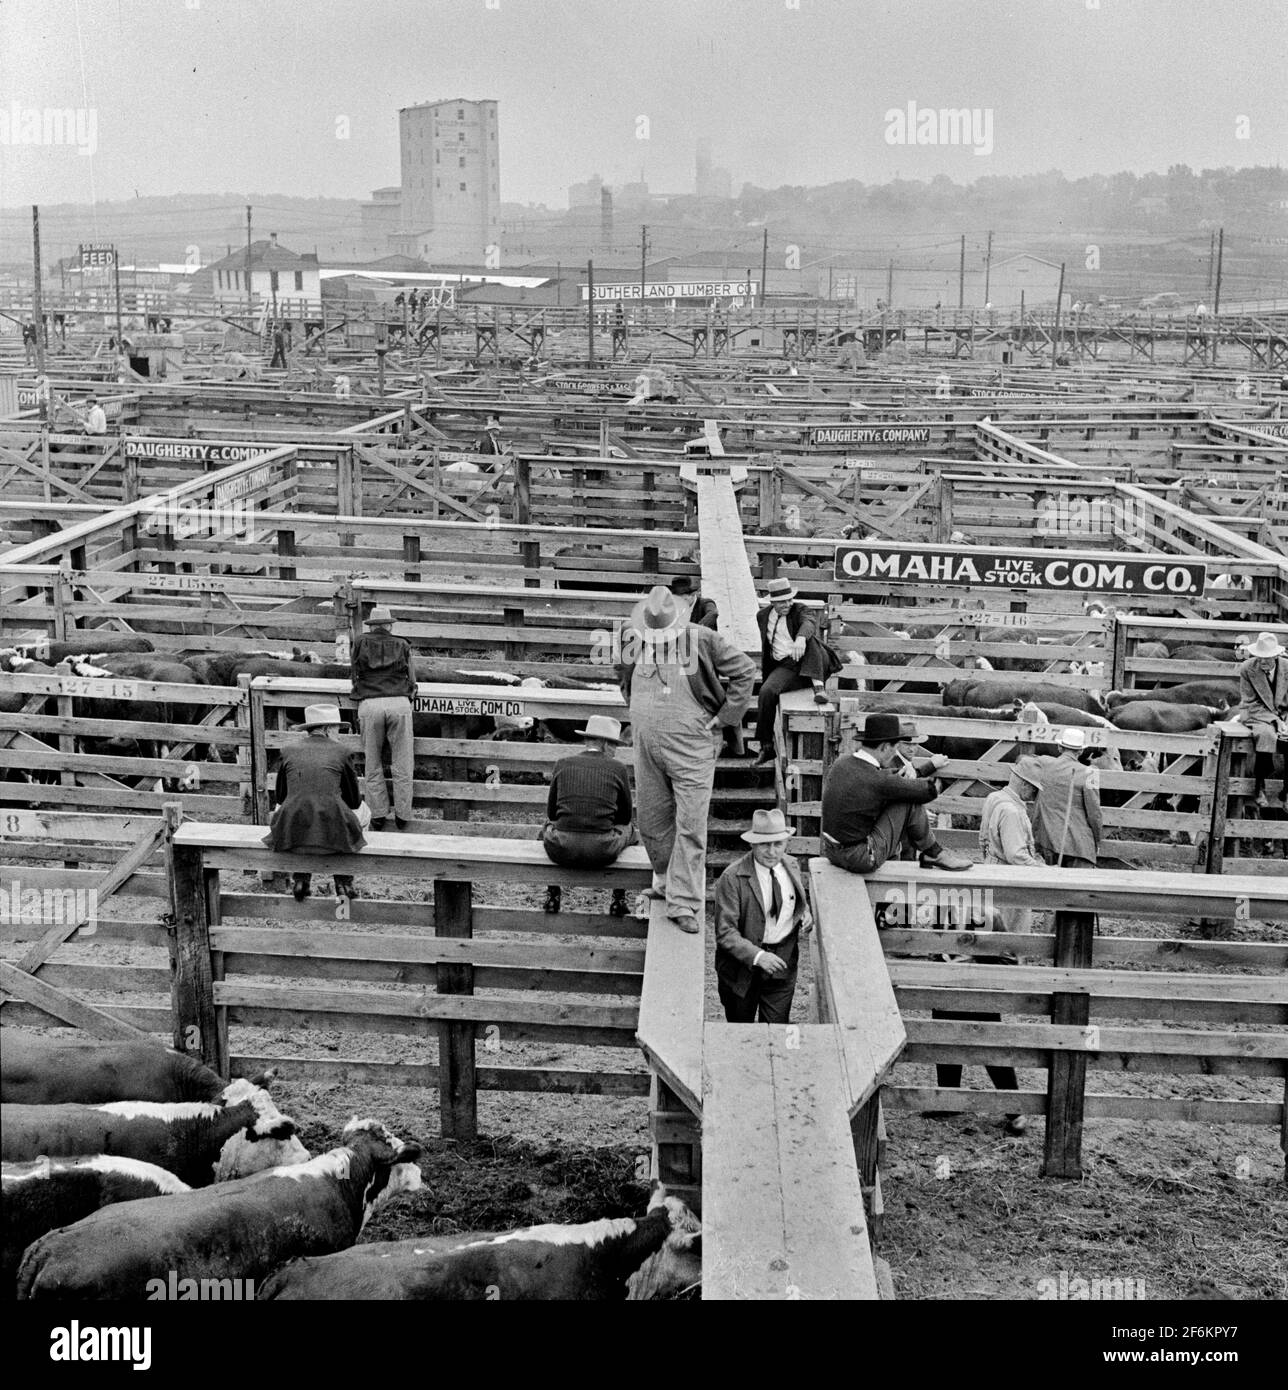 Cattle being inspected by commission men and buyers before auction sale. Union Stockyards, Omaha, Nebraska. 1941. Stock Photo